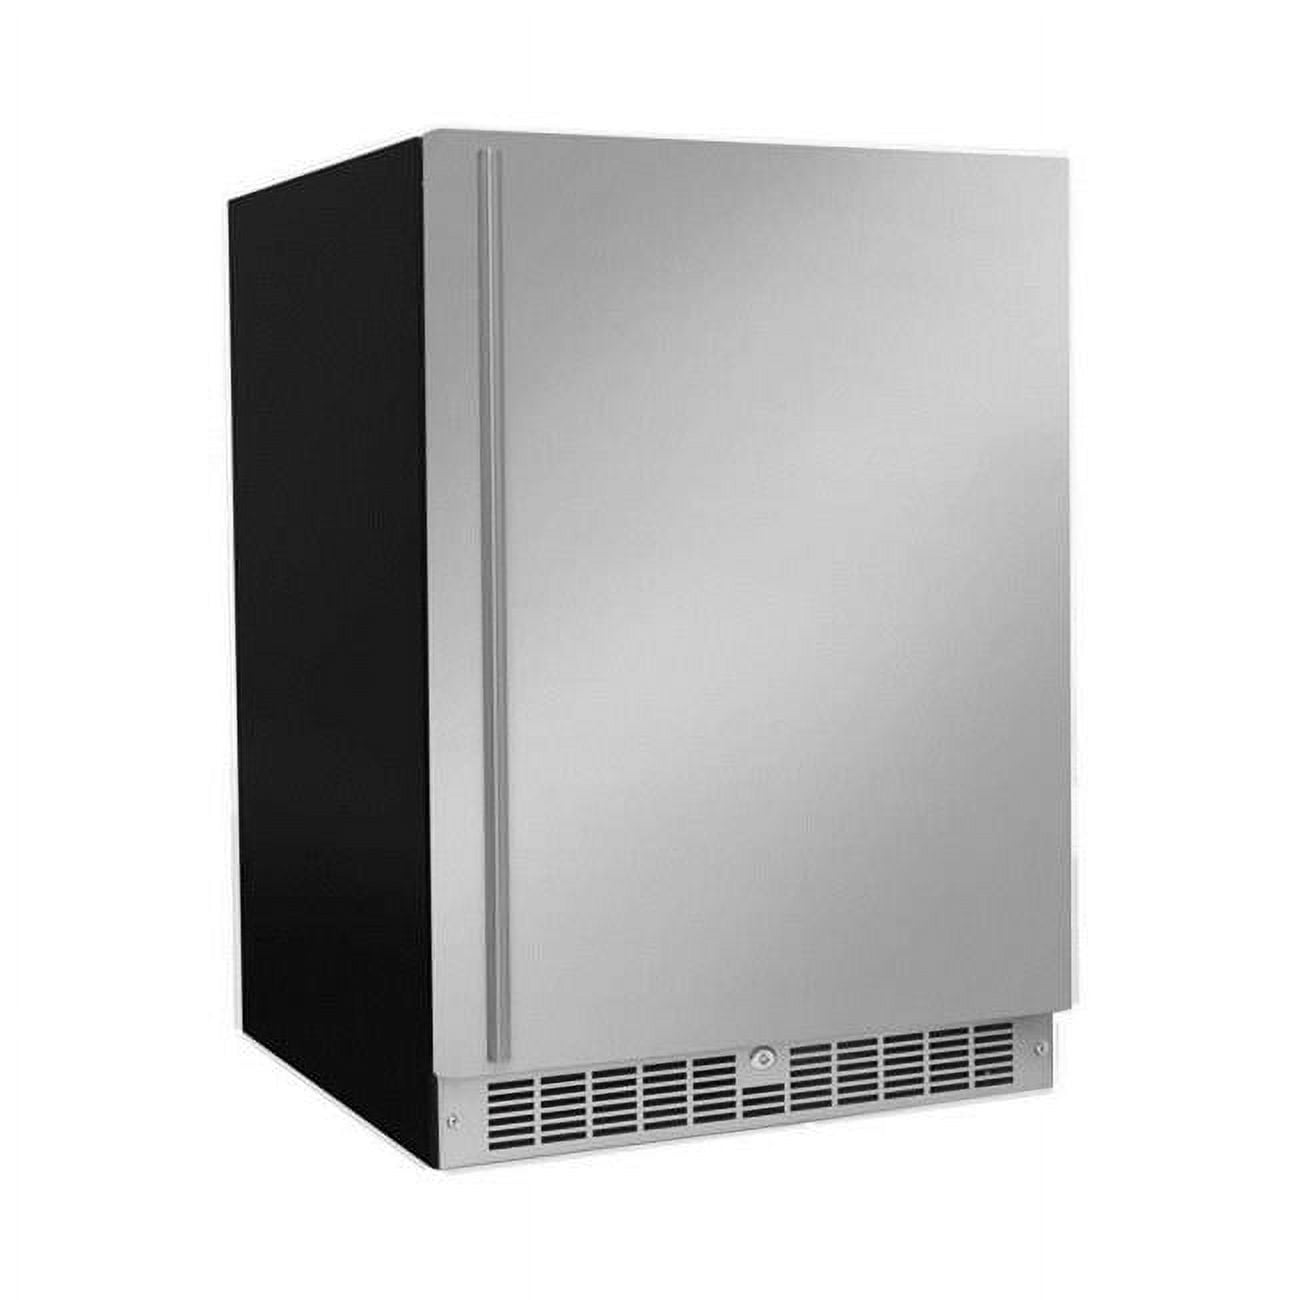 Picture of Danby SPRAR055D1SS 5.5 cu. ft. Silhouette Niagara Compact Integrated Refrigerator, Black